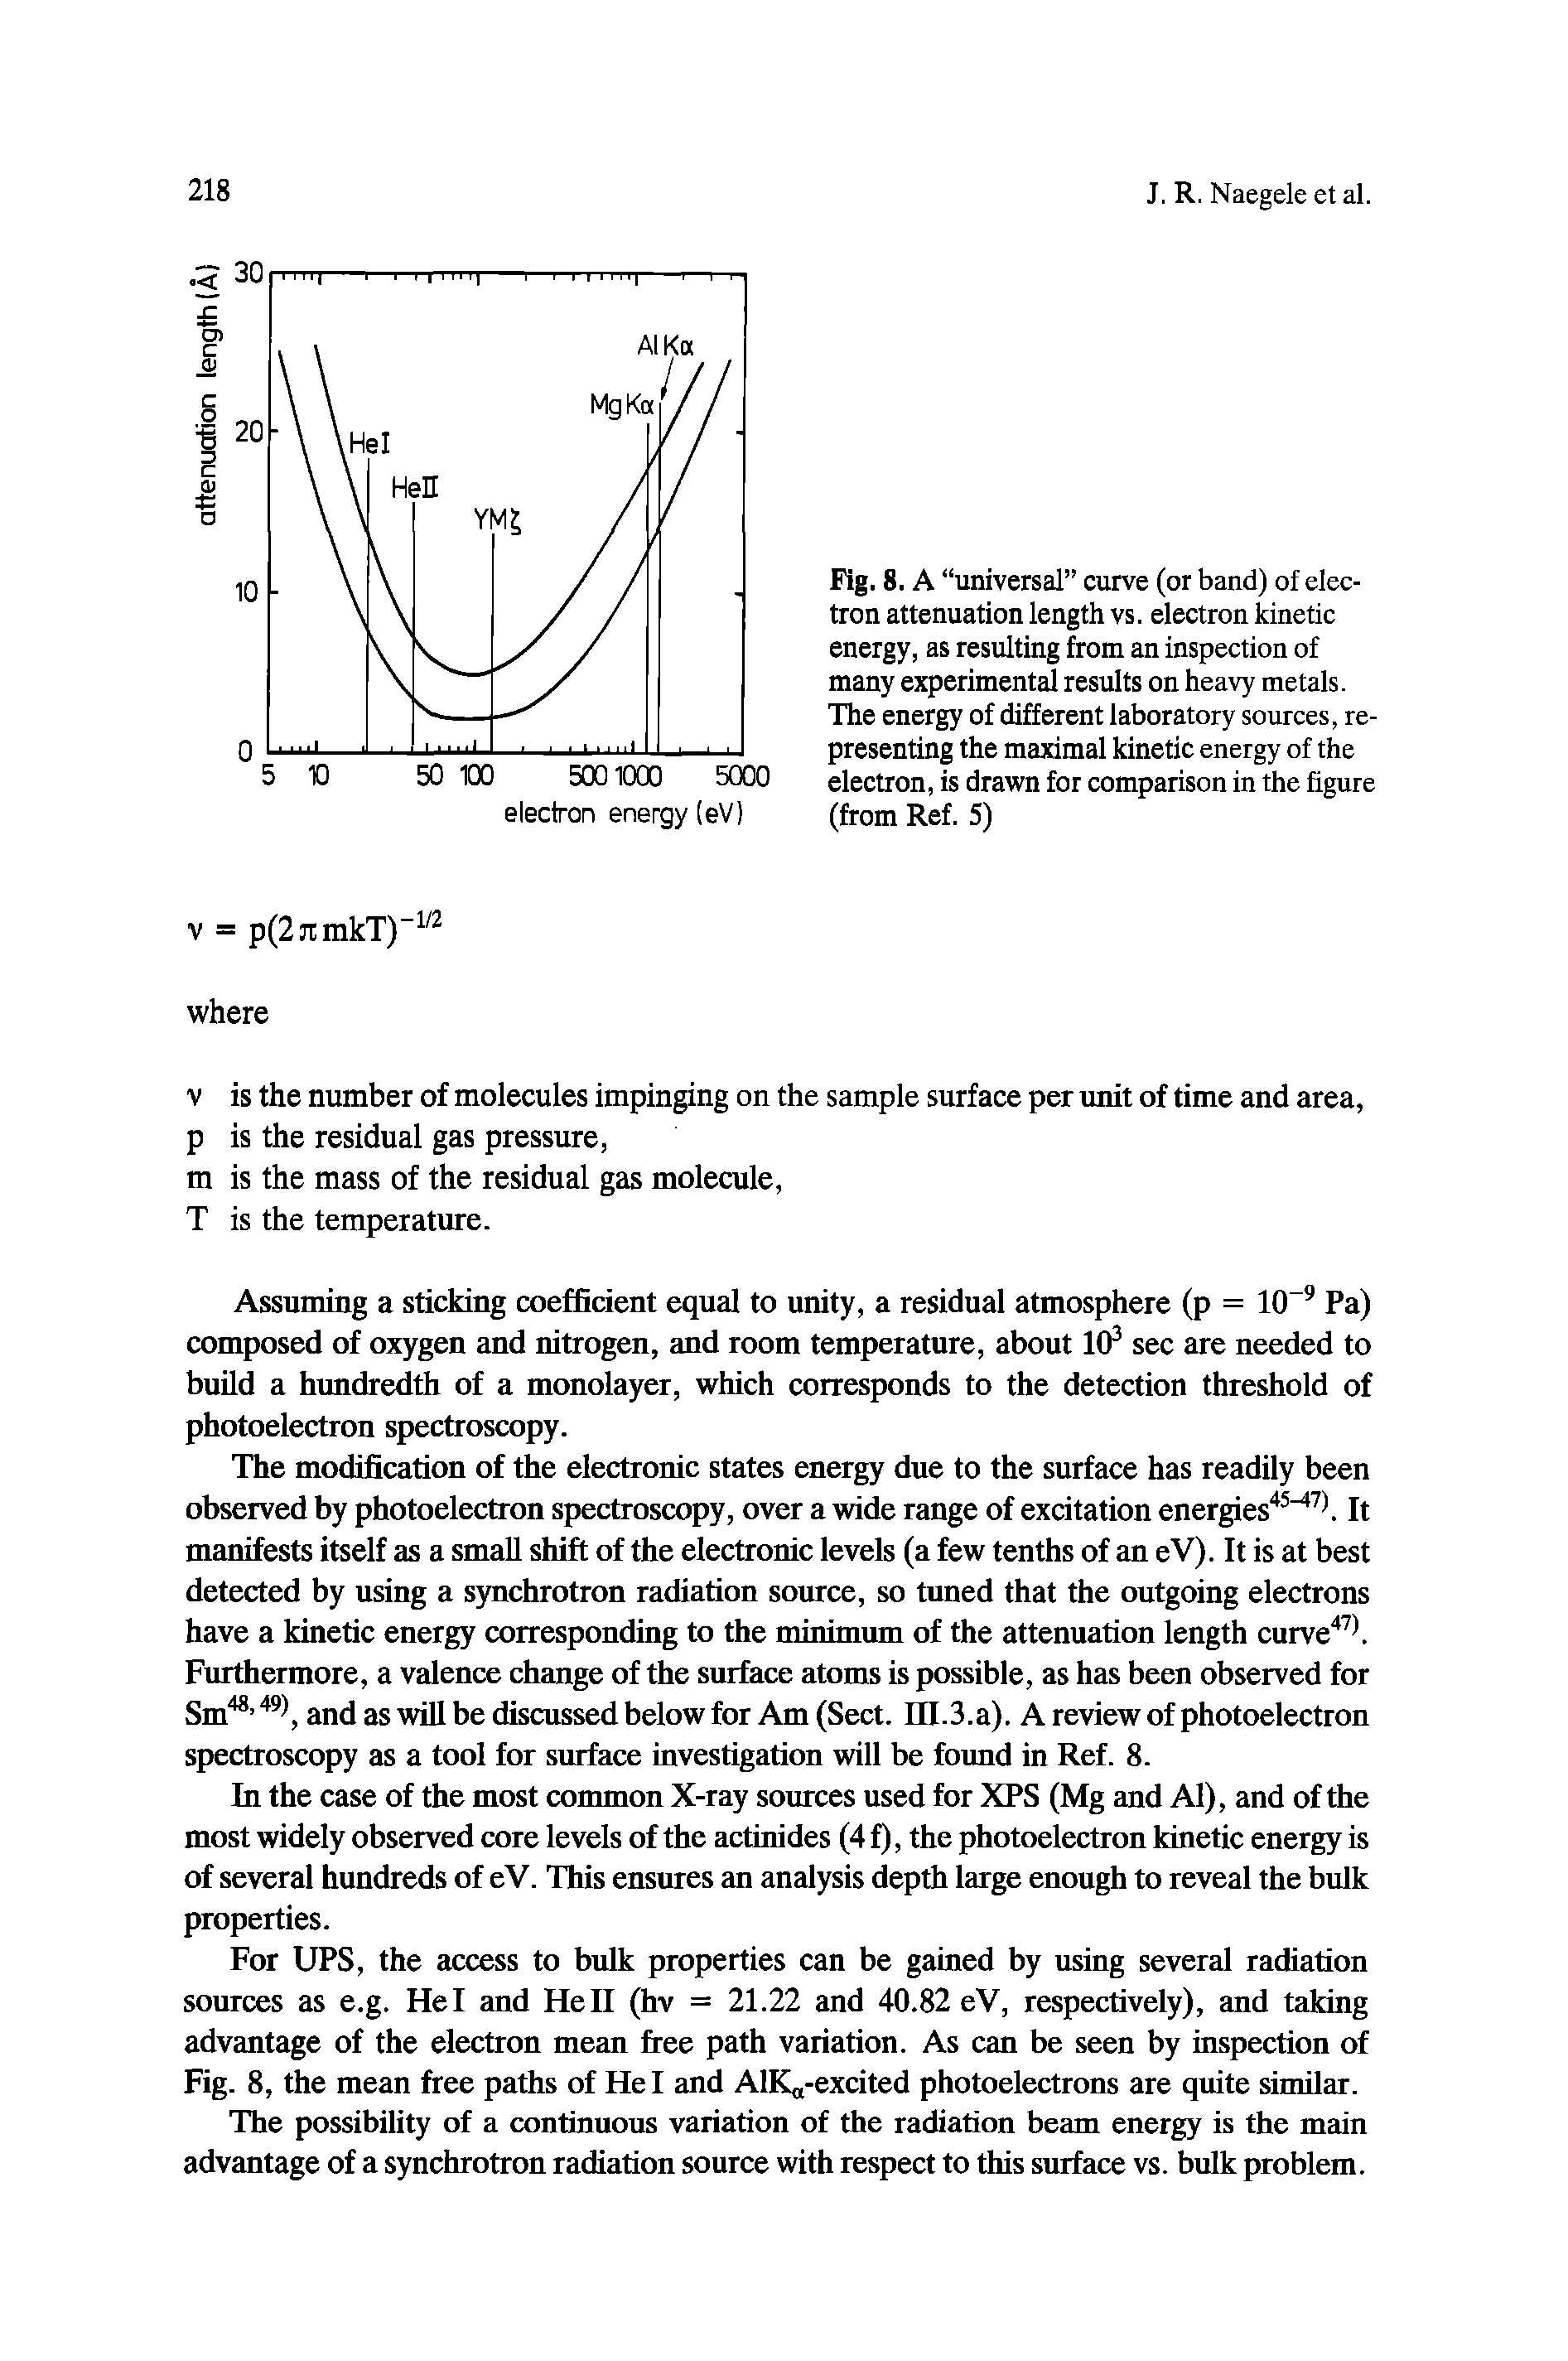 Fig. 8. A universal curve (or band) of electron attenuation length vs. electron kinetic energy, as resulting from an inspection of many experimental results on heavy metals. The energy of different laboratory sources, representing the maximal kinetic energy of the electron, is drawn for comparison in the figure (from Ref. 5)...